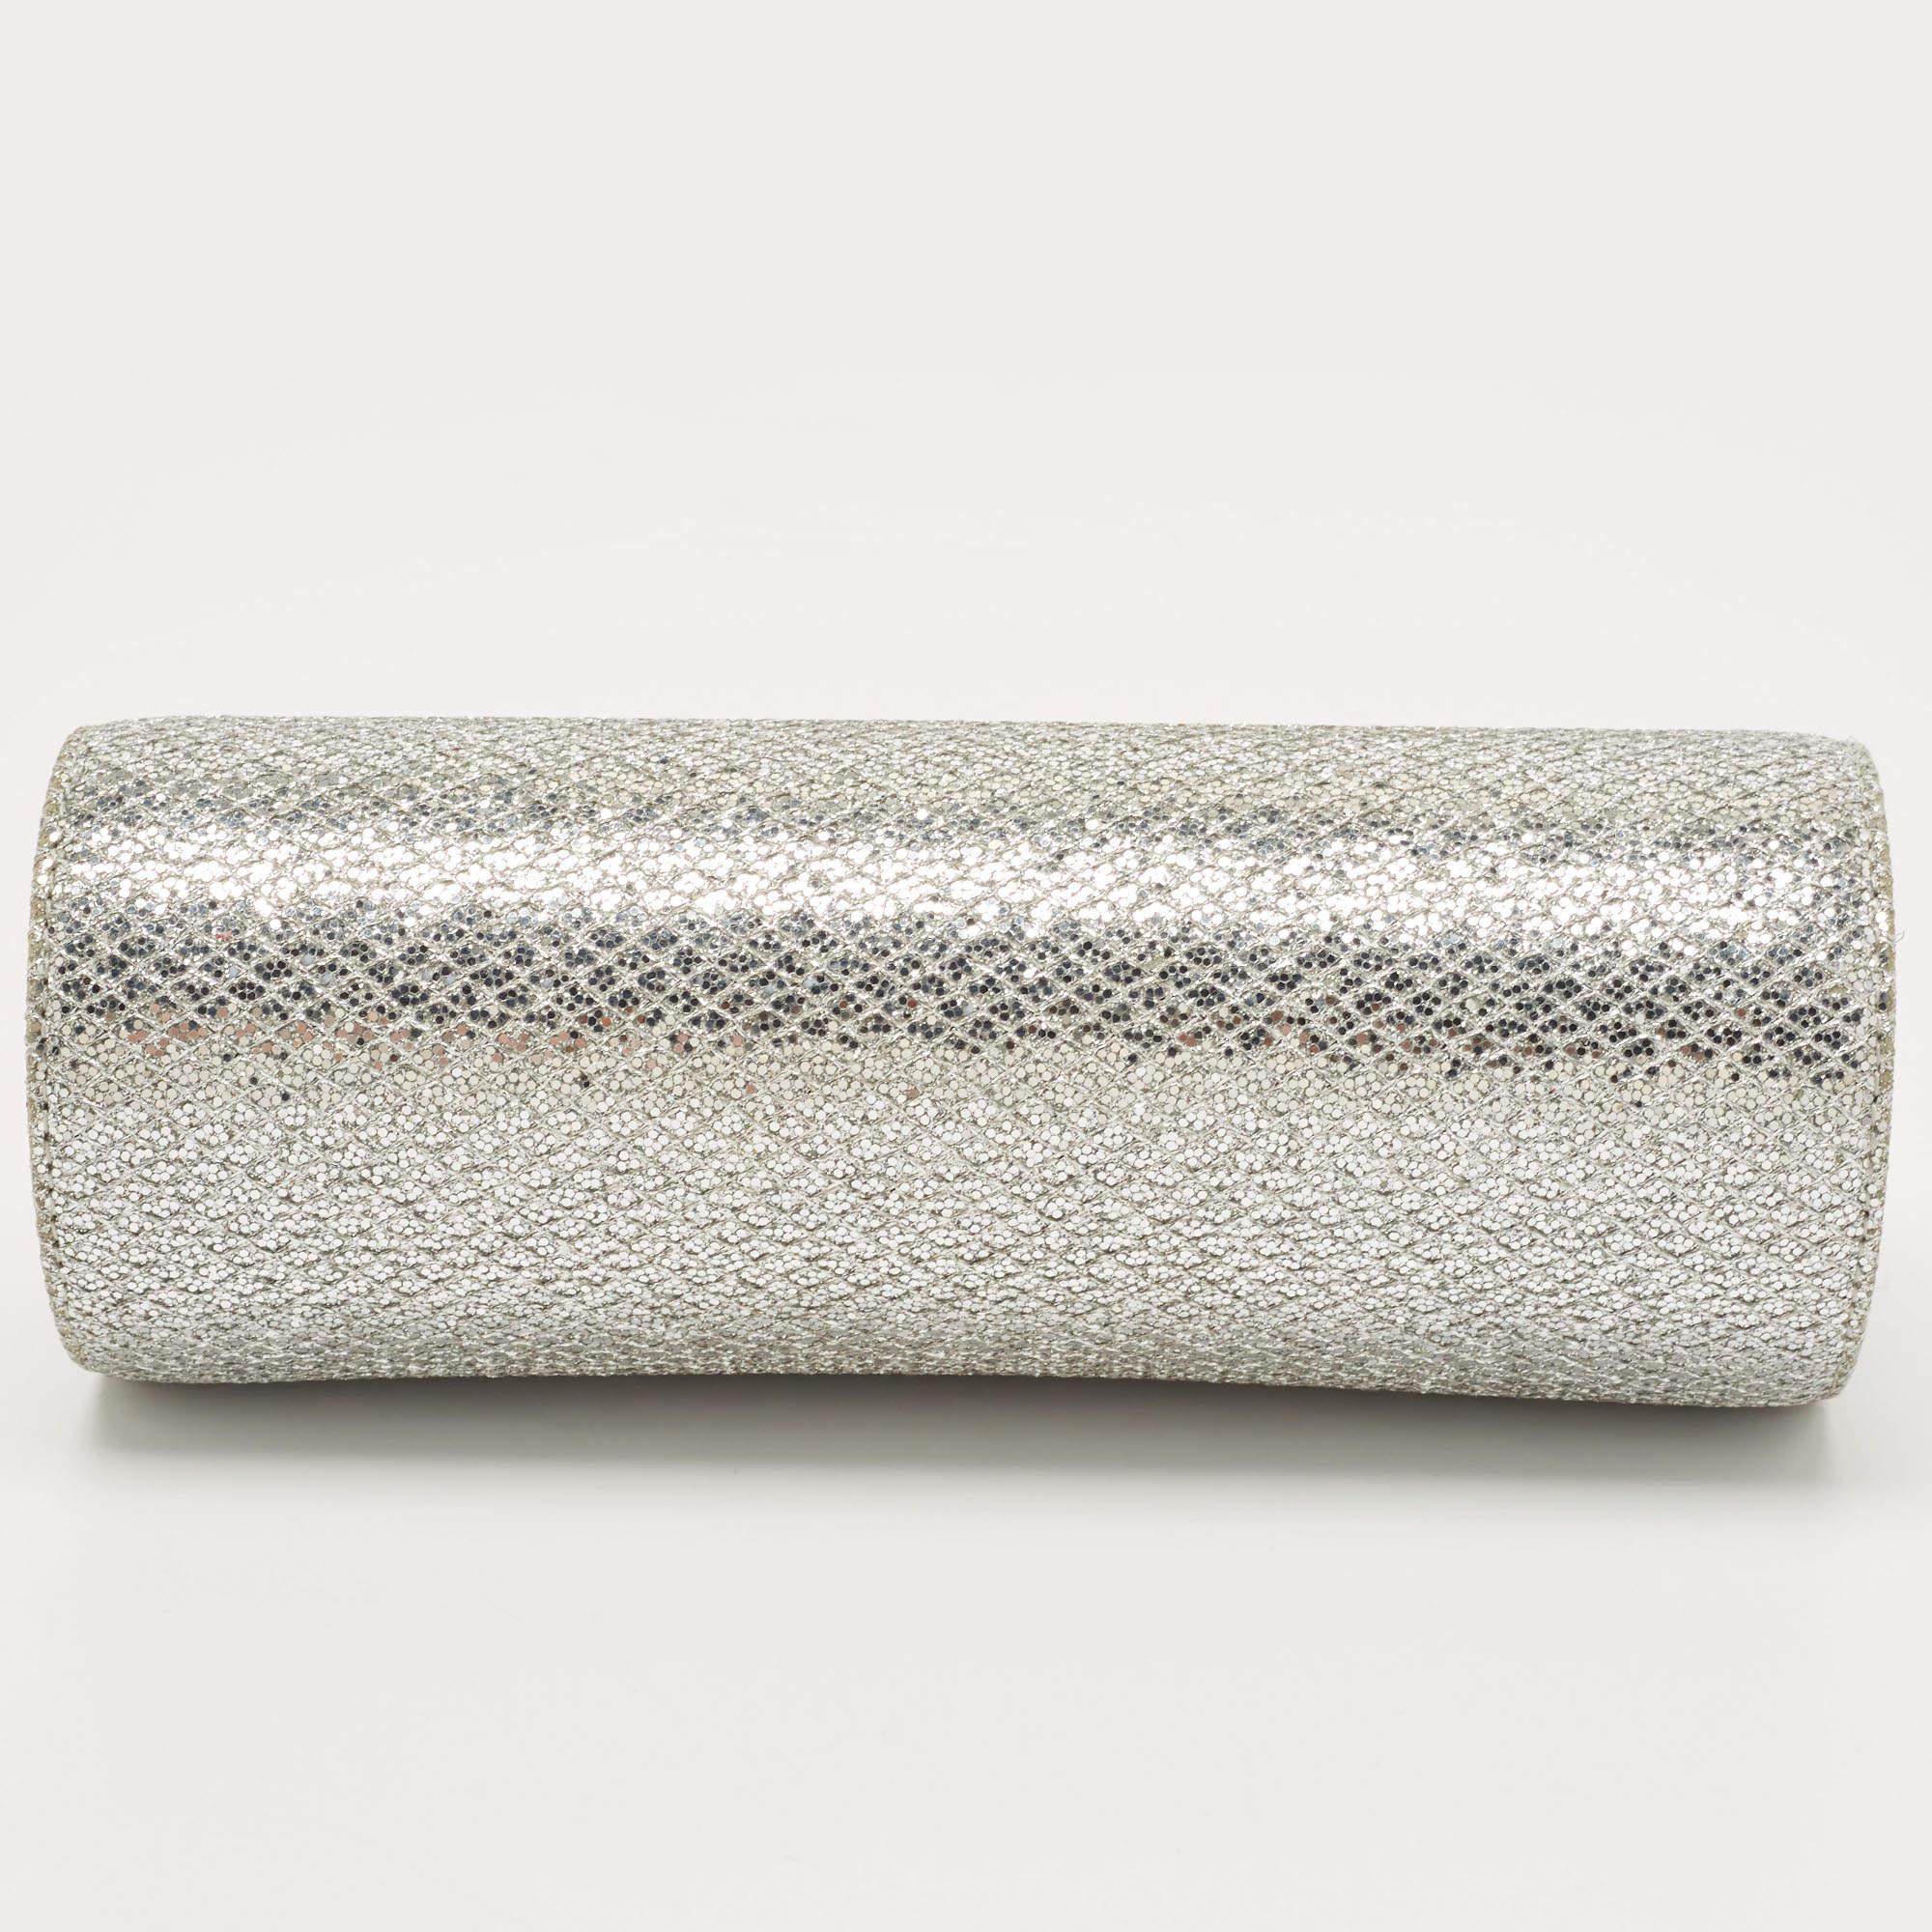 This Jimmy Choo silver clutch is a creation marked by excellent craftsmanship and refined style. This barrel-shaped clutch is crafted with skill and impeccably finished to be a luxurious accessory in your hand.

Includes: Original Dustbag

